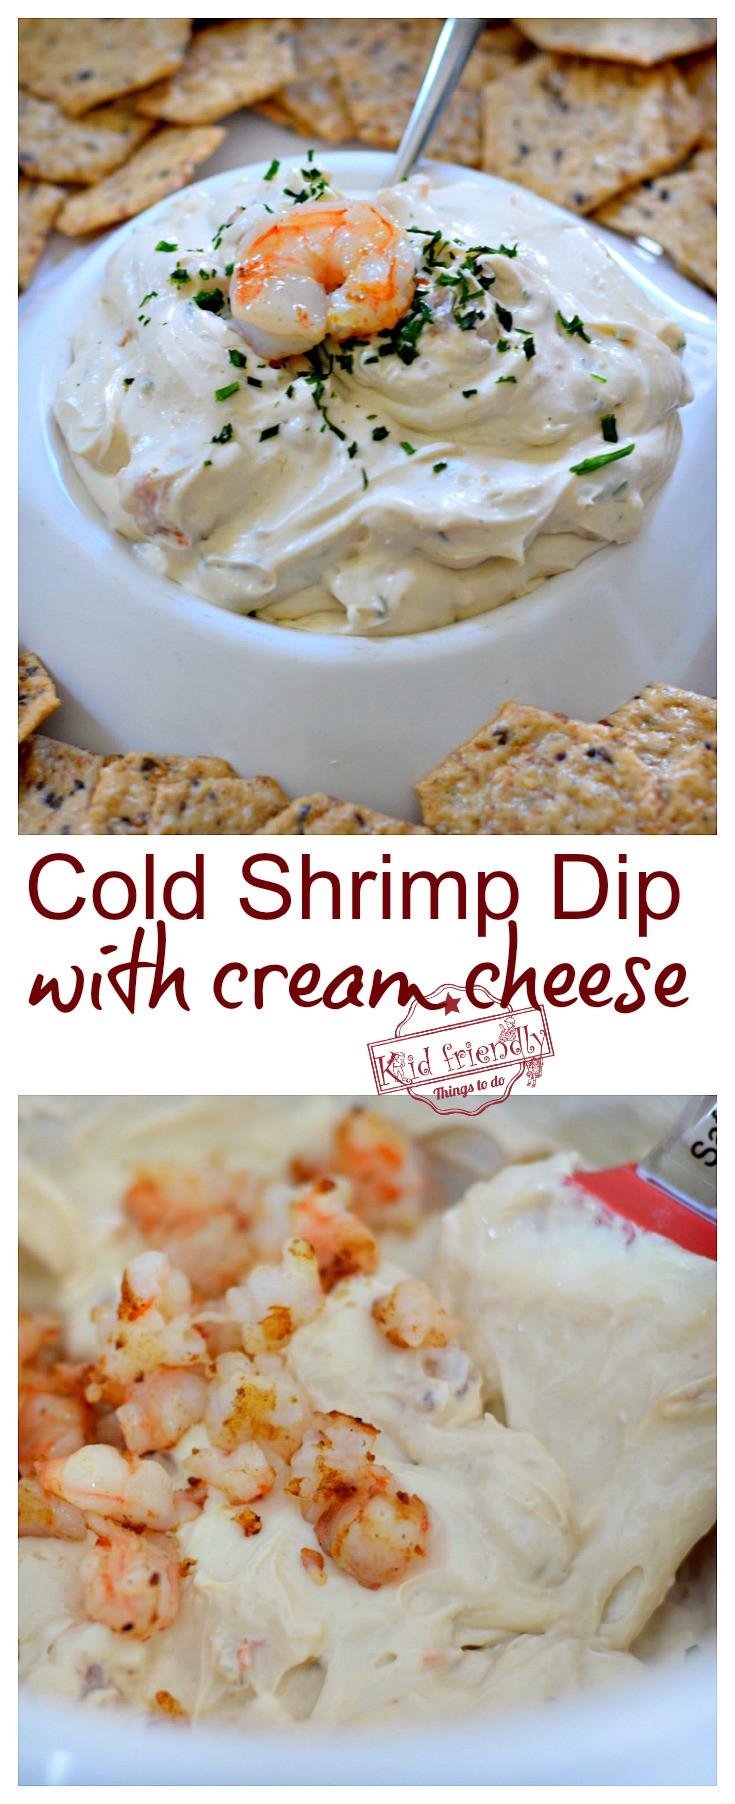 Cold Christmas Appetizers
 The Best Cold Shrimp Dip Recipe With Cream Cheese